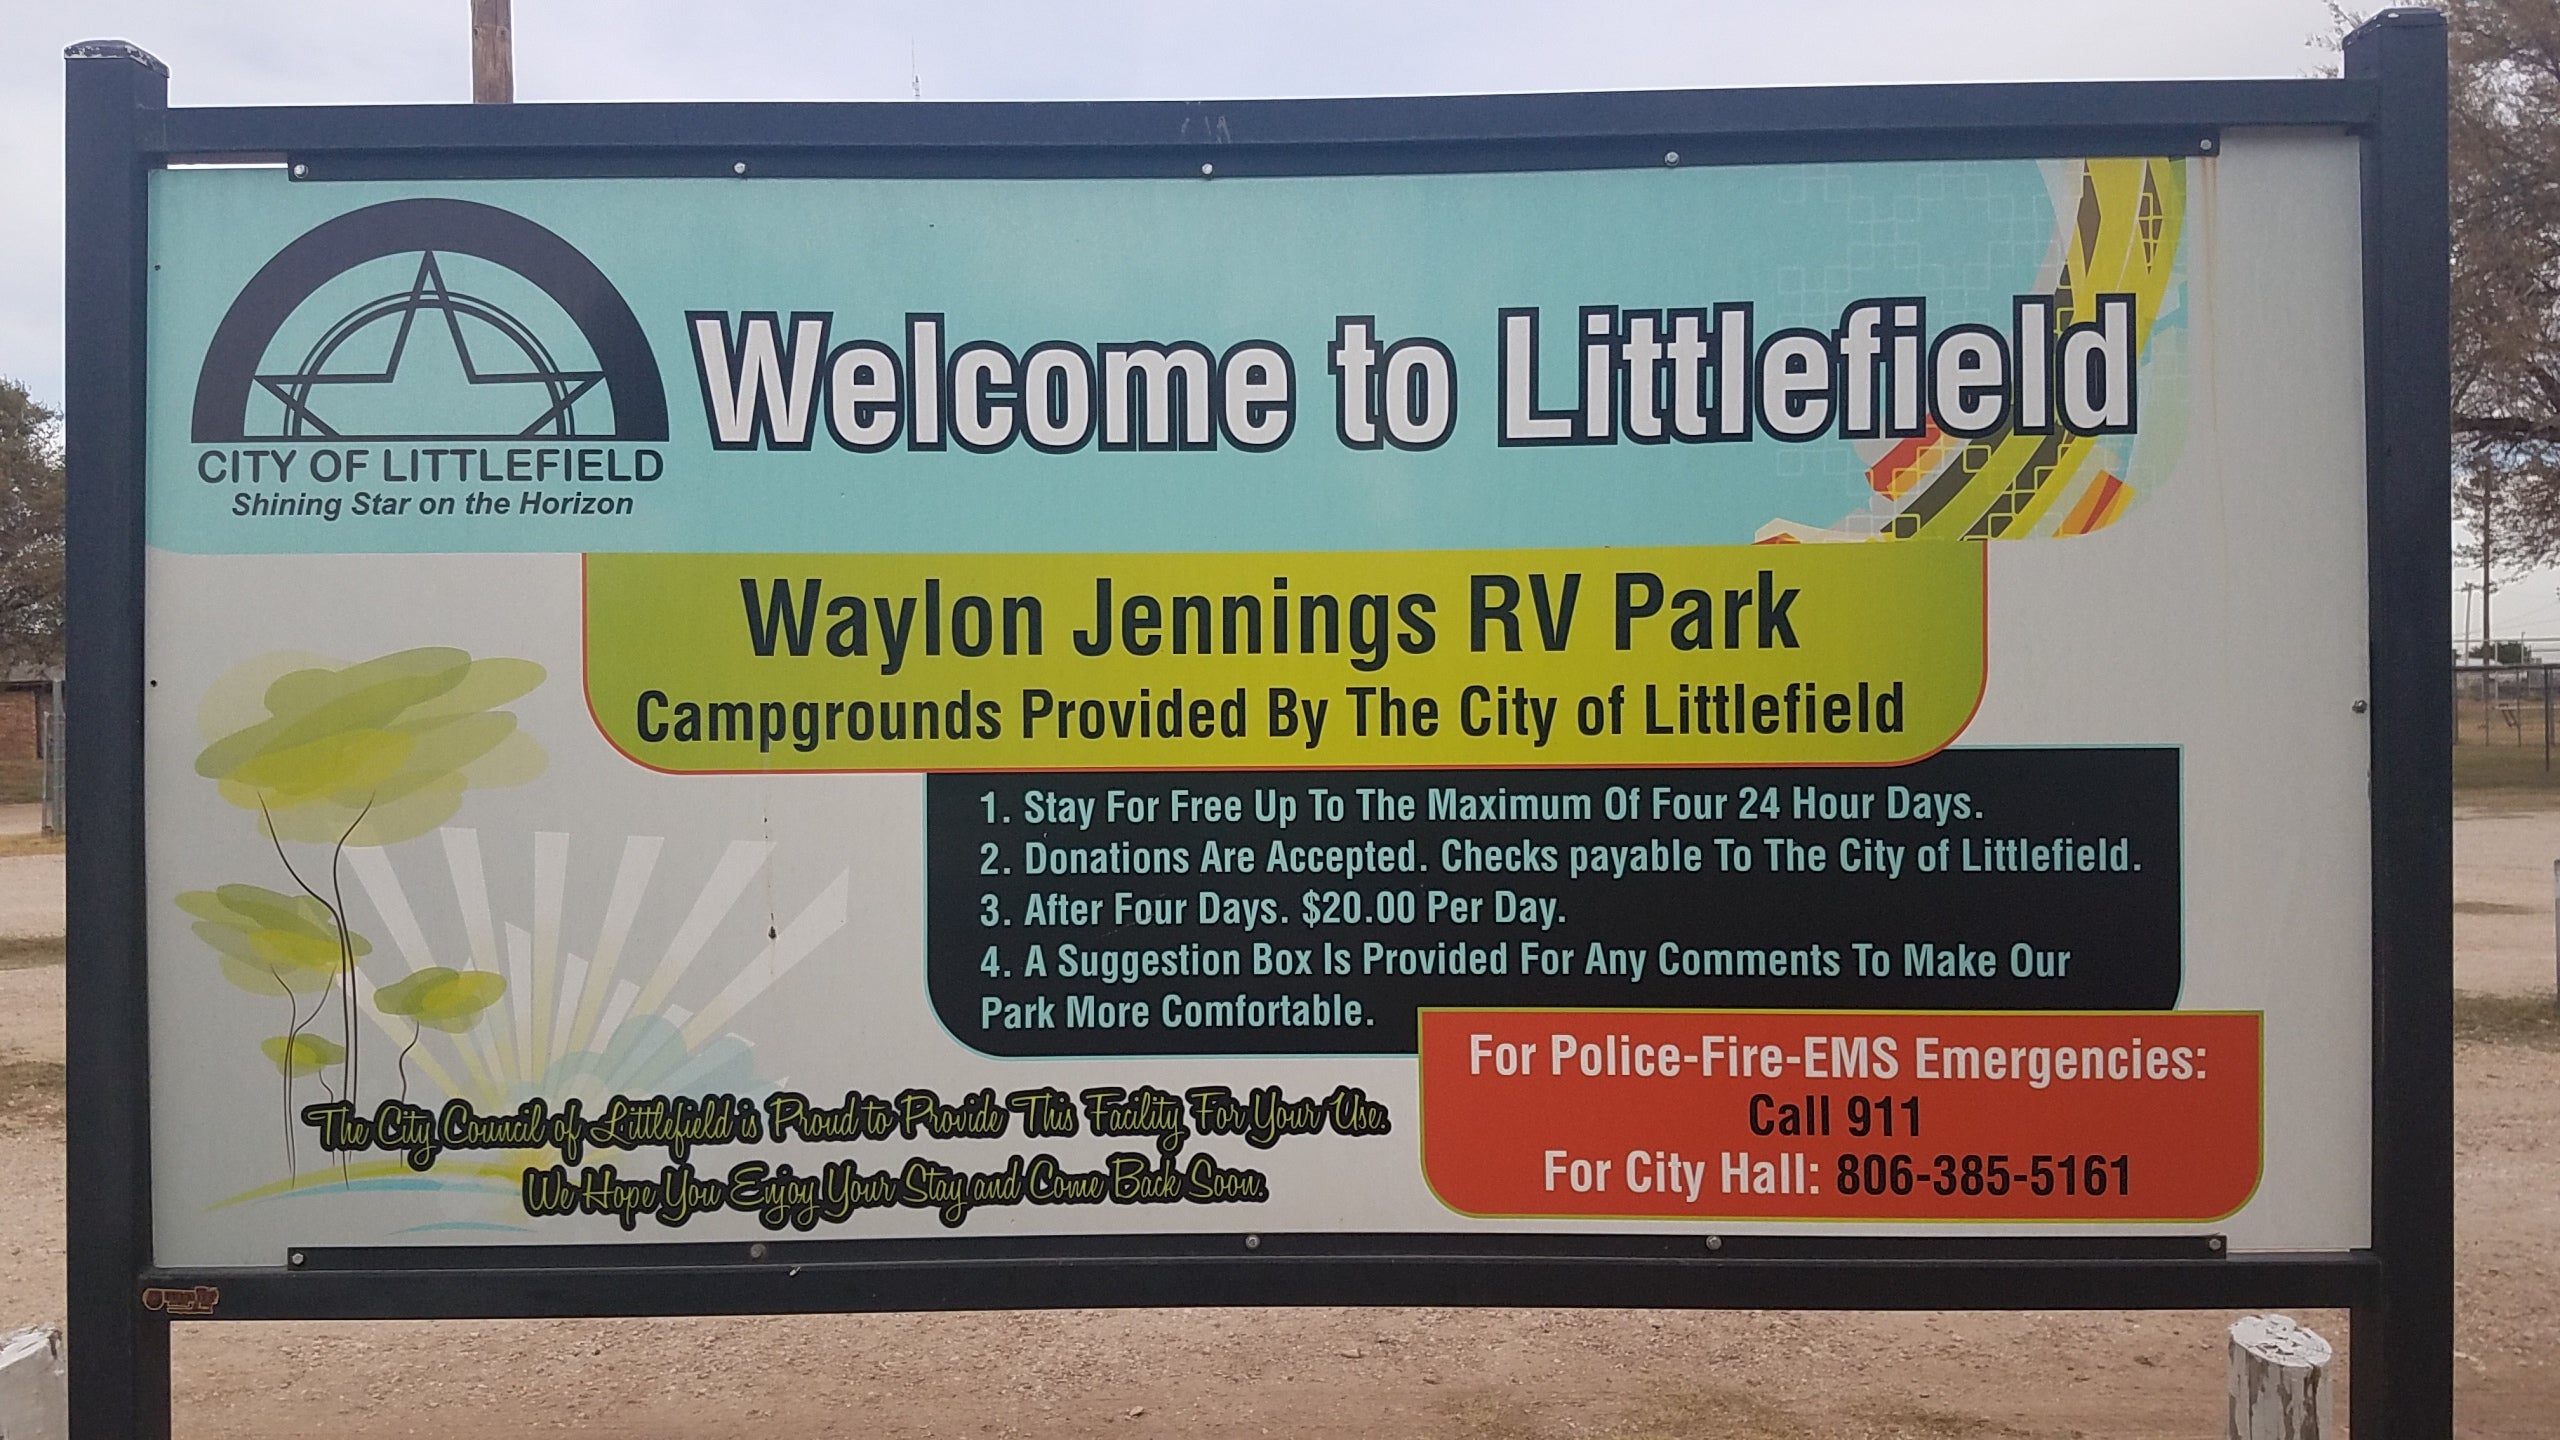 Camper submitted image from Waylon Jennings RV Park - 1